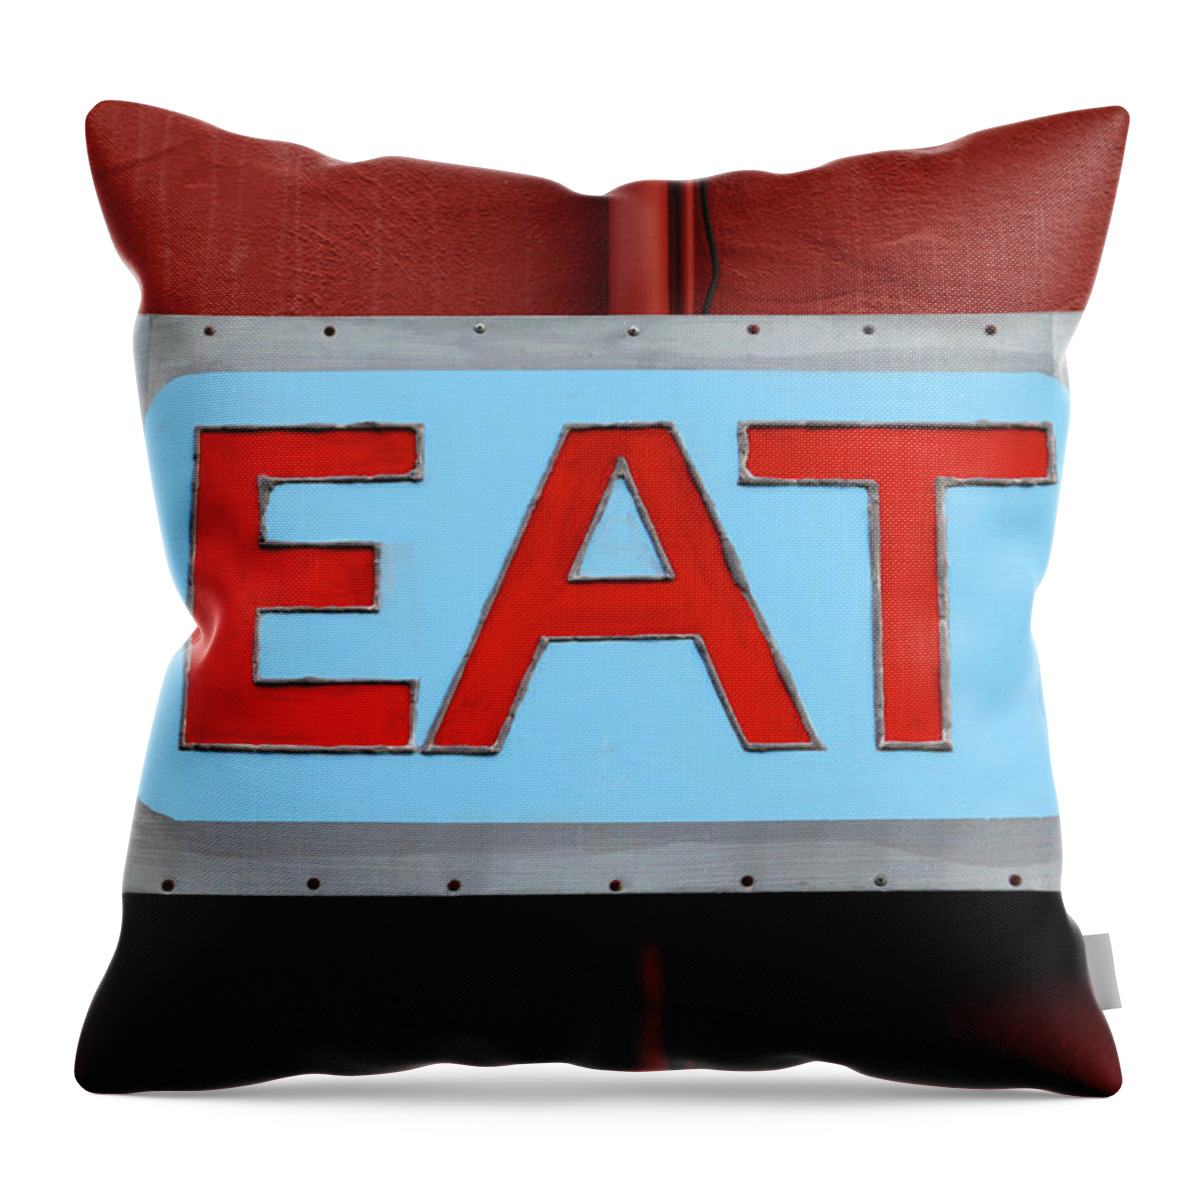 Eat Signs Throw Pillow featuring the photograph Eat by Art Block Collections